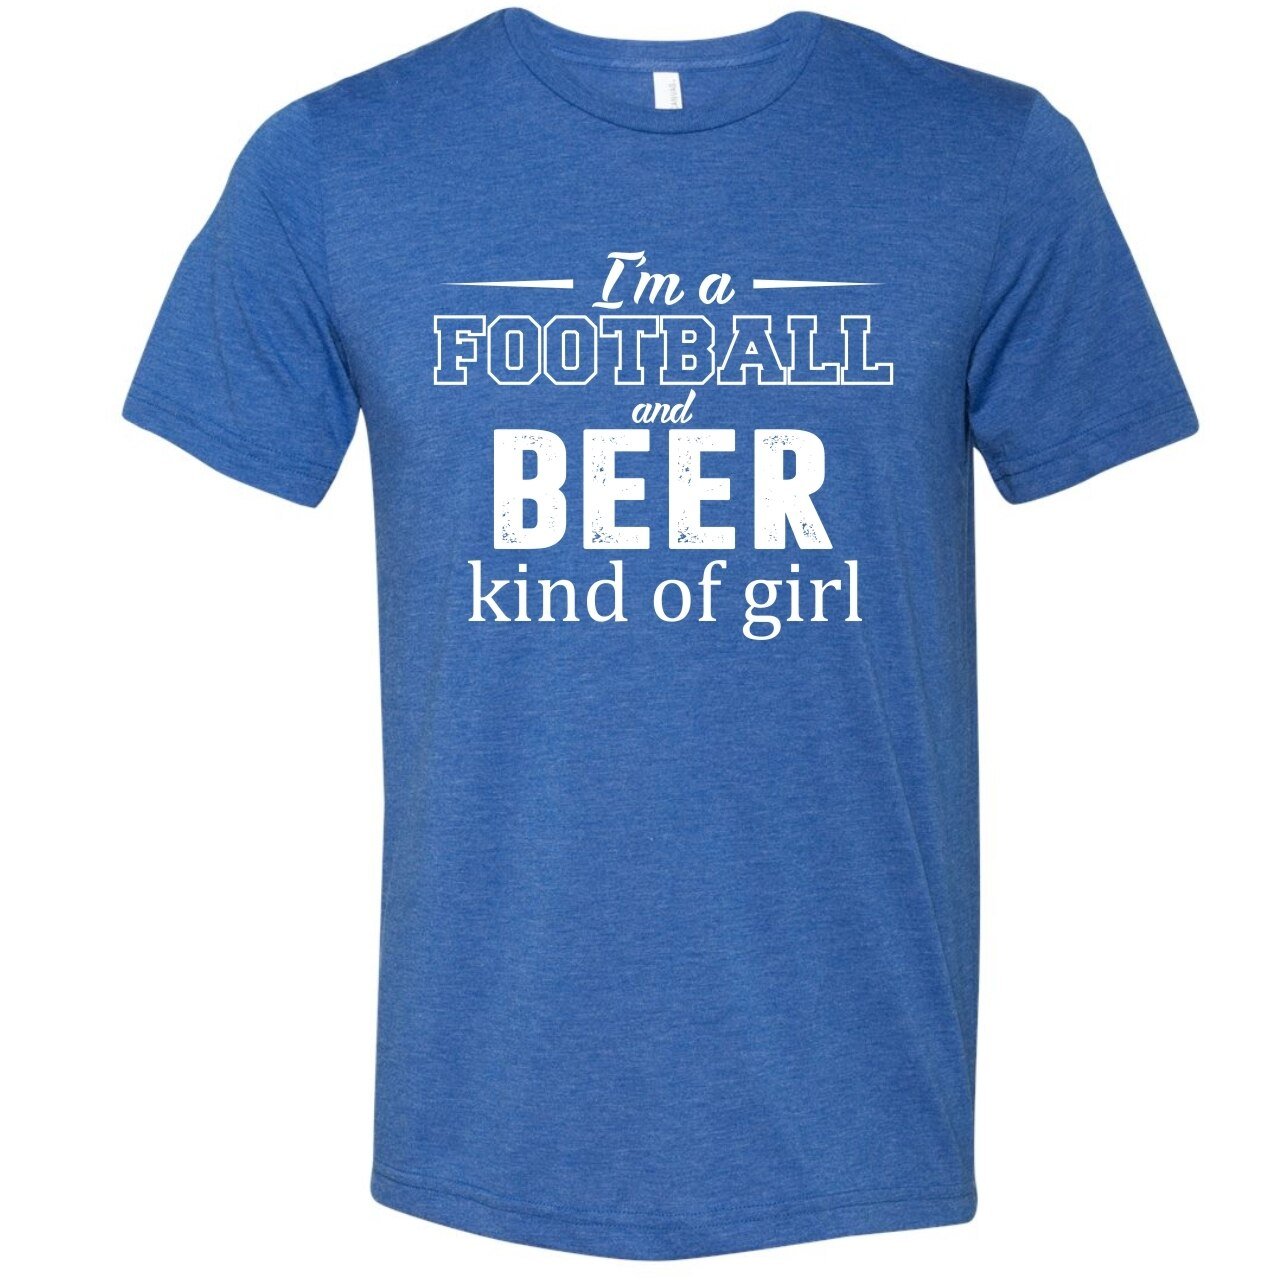 I'm A Football and Beer Kind of Girl - Unisex Tee - The Graphic Tee